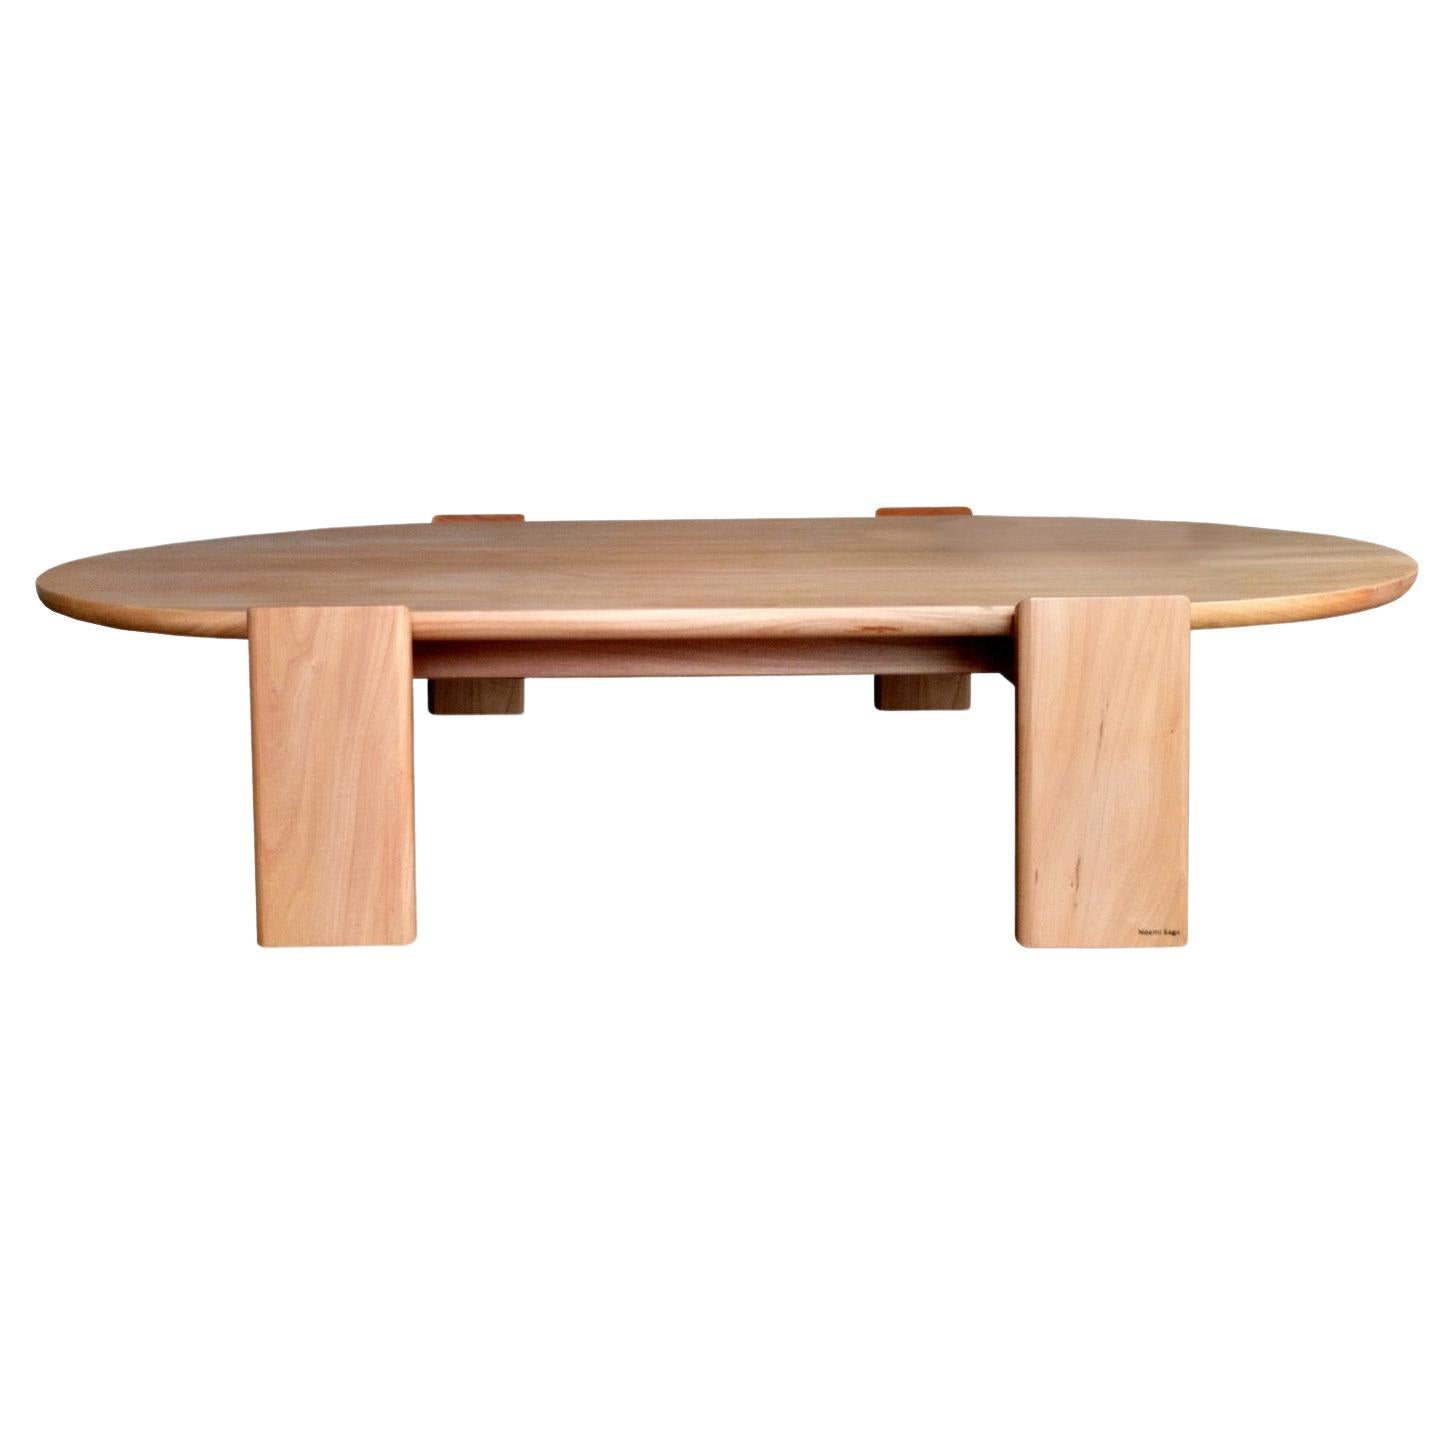 Cookie Coffee Table Handcrafted in Brazilian Solid Wood, 'Oval'